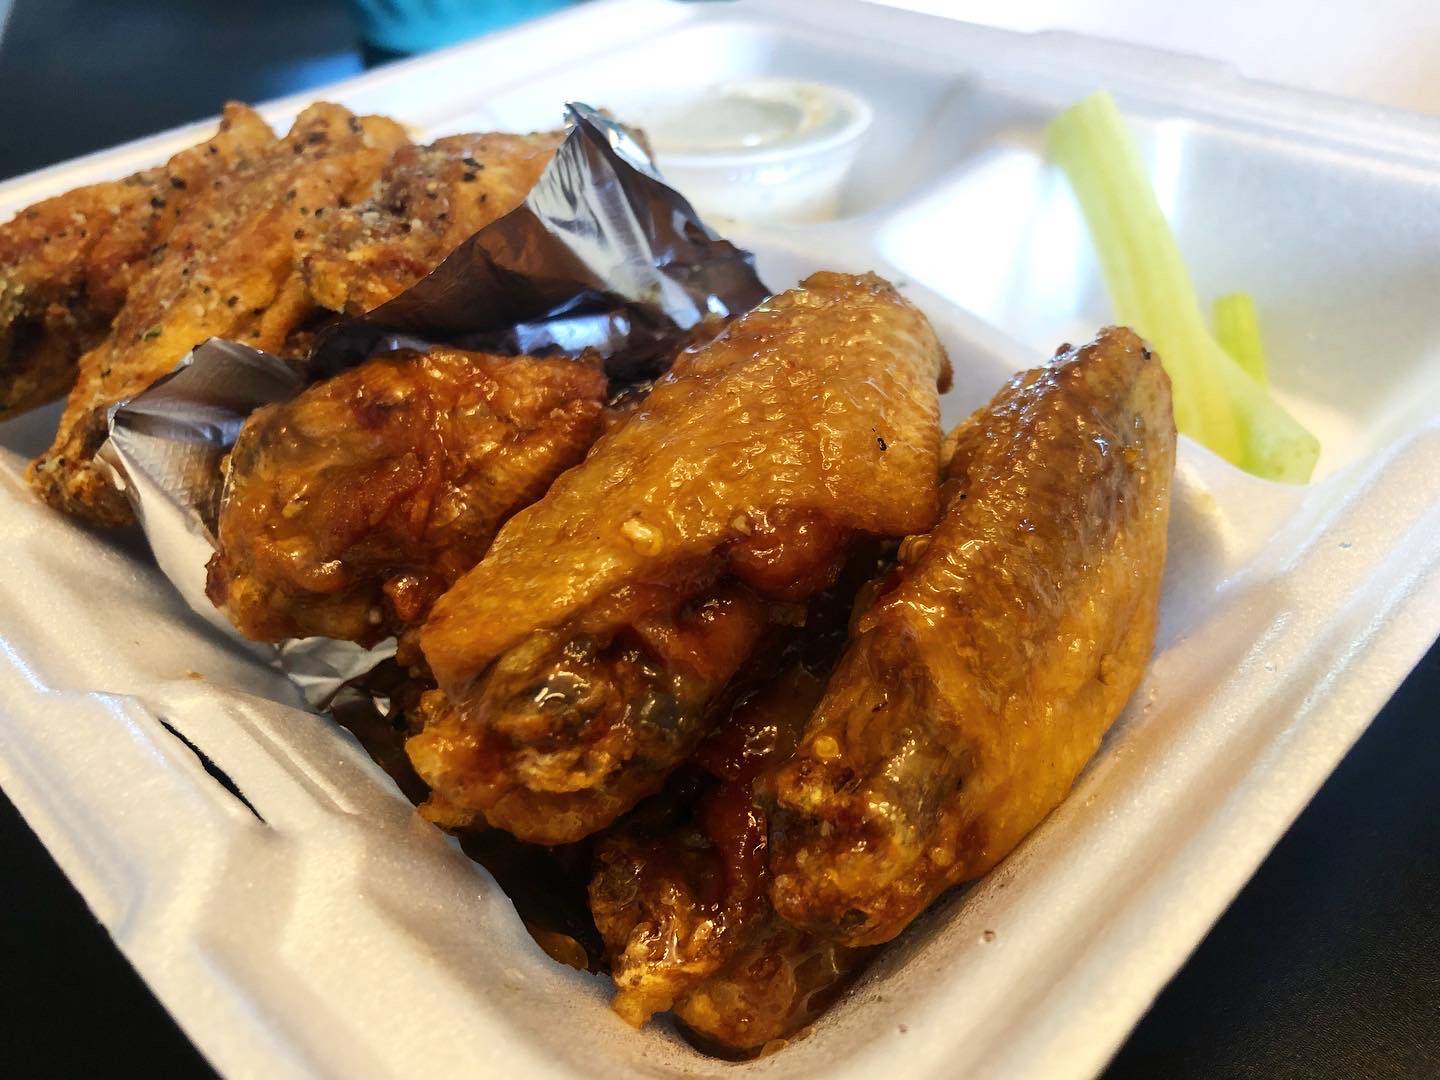 A close up of the five wings with rum sauce. Photo by Alyssa Buckley.